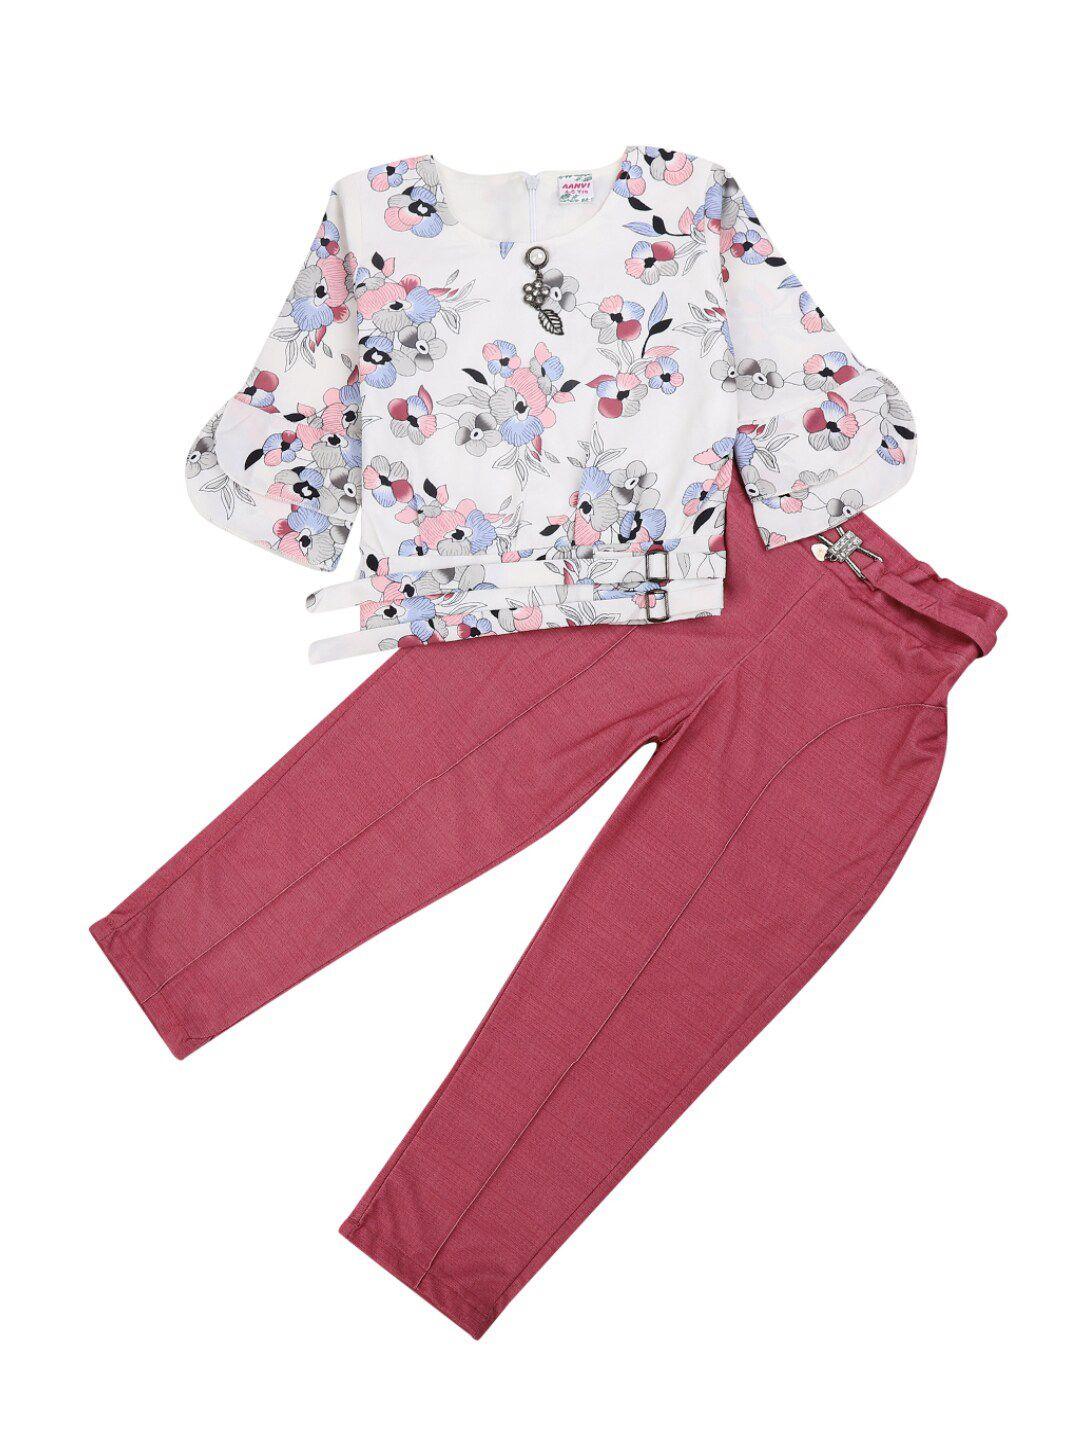 v-mart kids peach-coloured printed cotton t-shirt with trousers